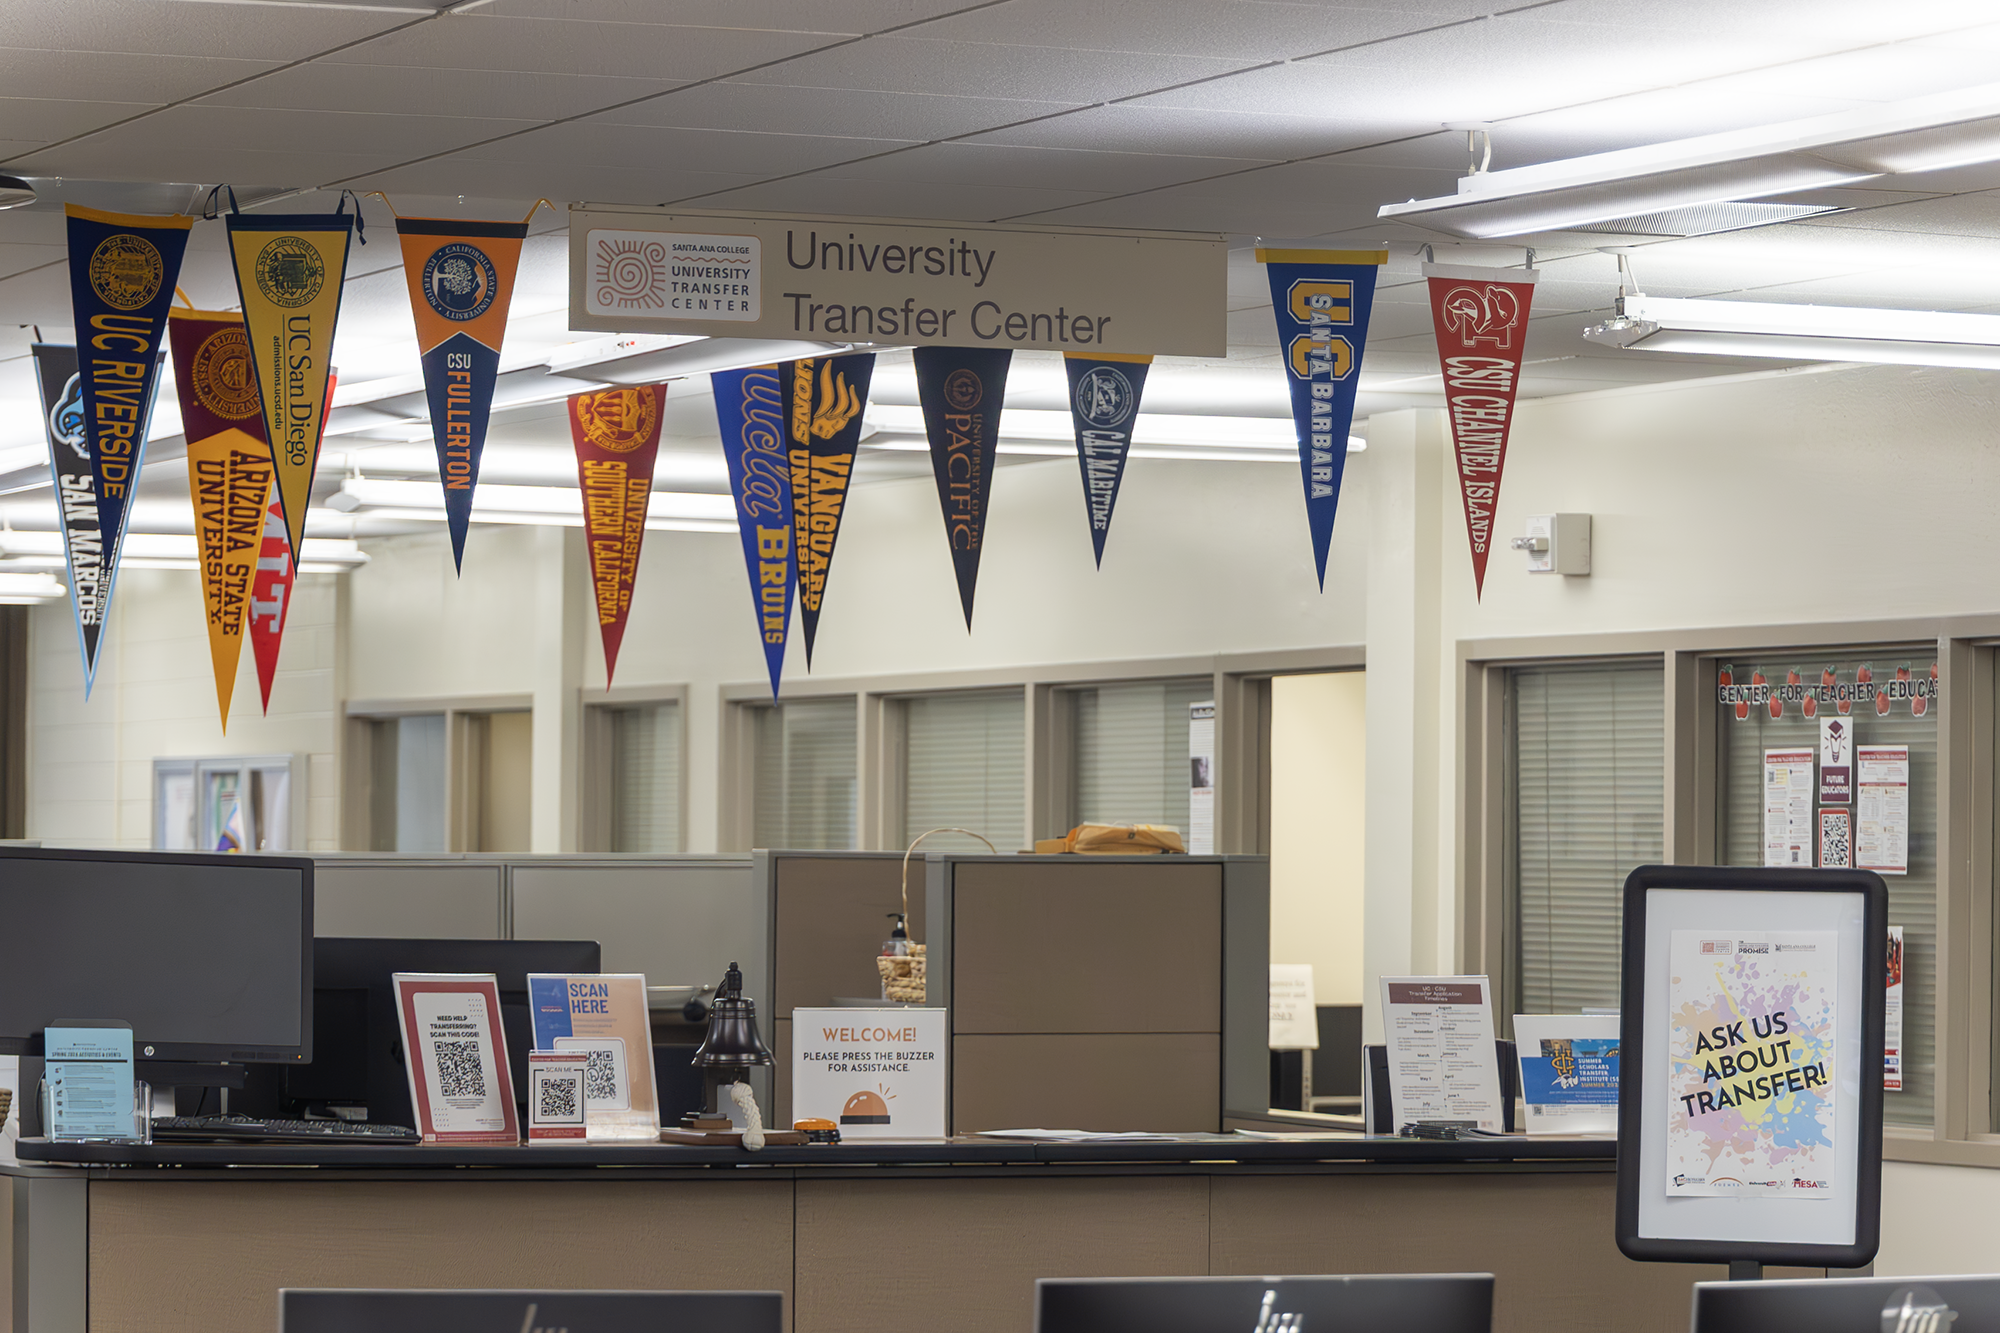 Transfer center check in desk displays the flags of the colleges most frequently transferred to .